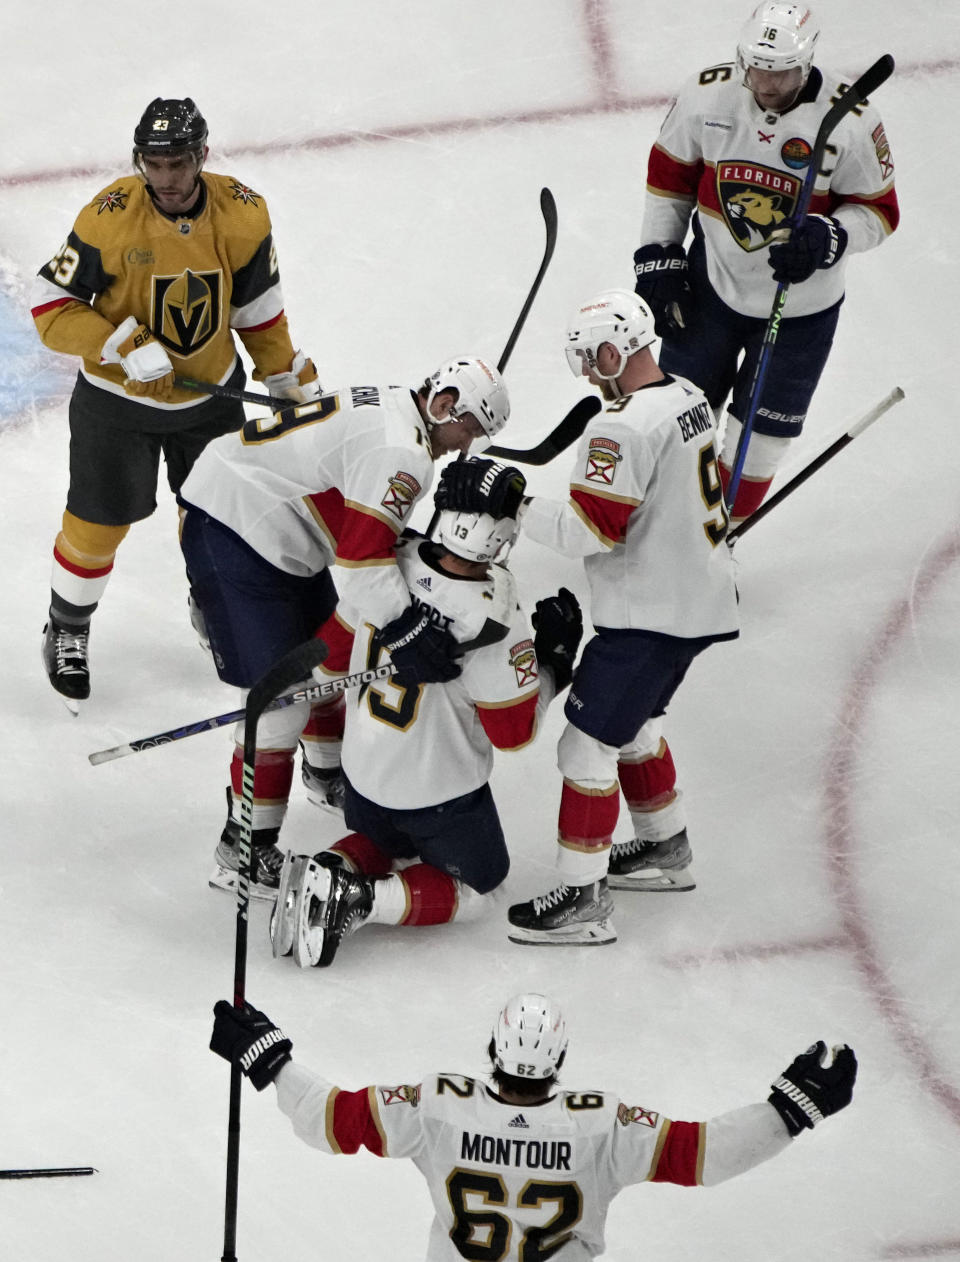 Florida Panthers celebrate after center Sam Reinhart (13) scored against the Vegas Golden Knights during the second period of an NHL hockey game Thursday, Jan. 12, 2023, in Las Vegas. (AP Photo/John Locher)